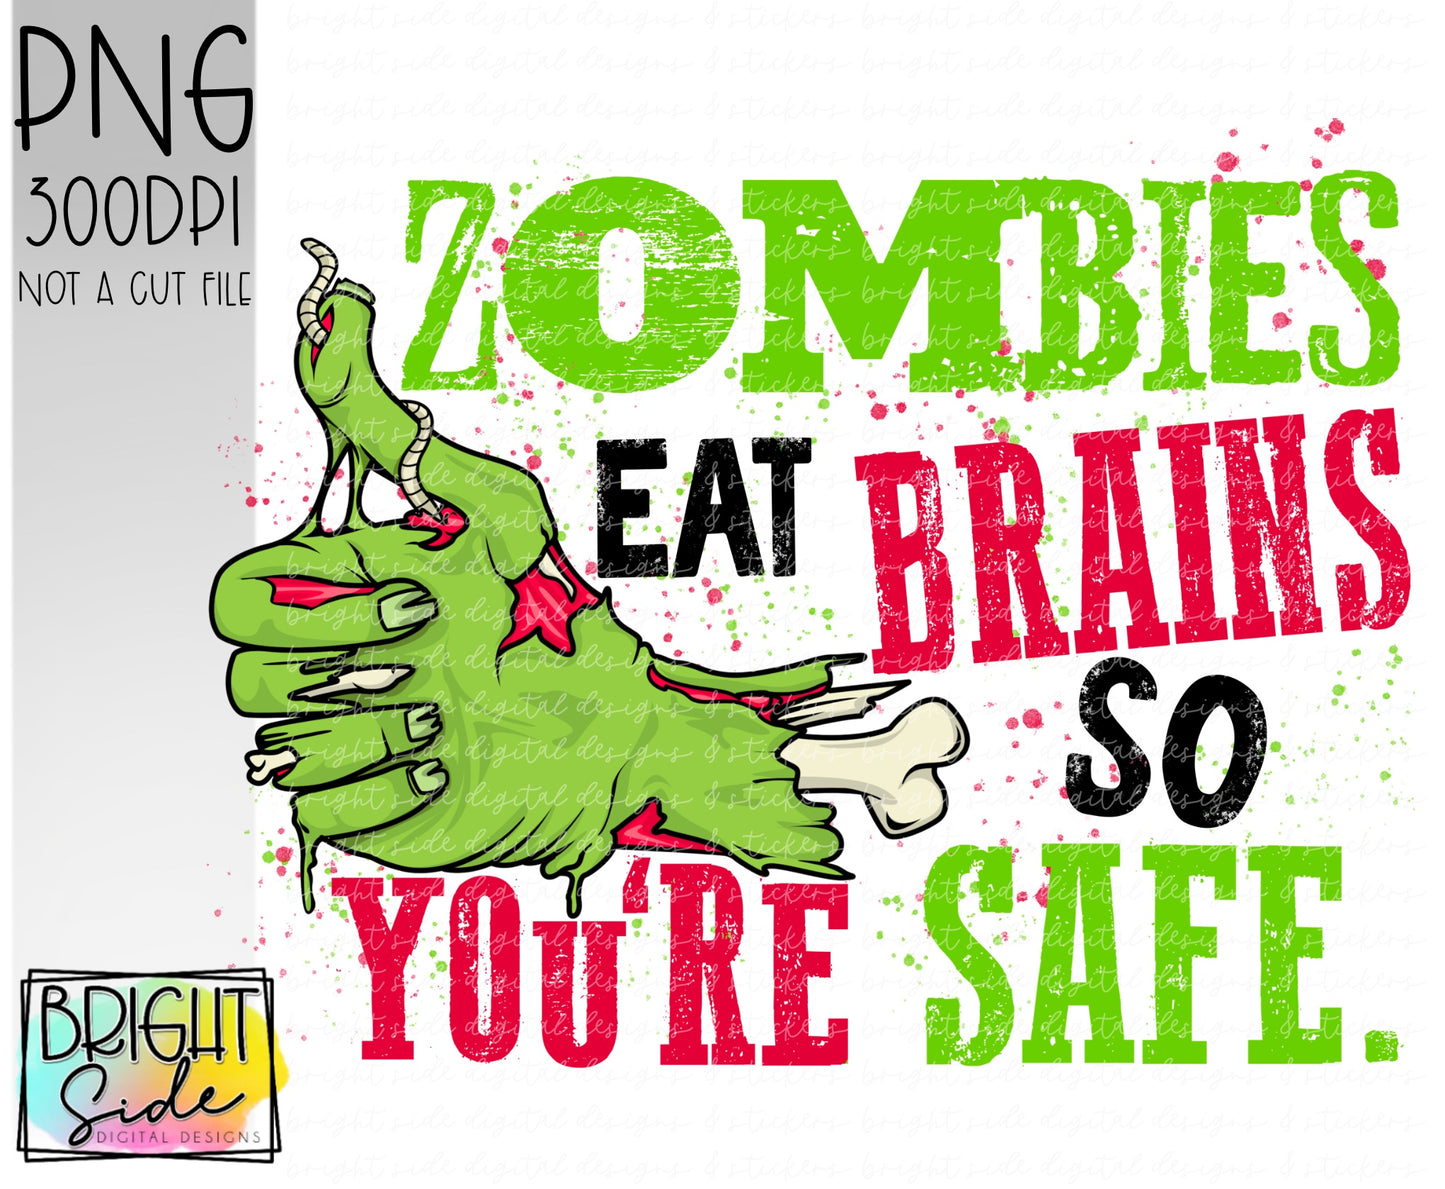 Zombies eat brains so you’re safe.